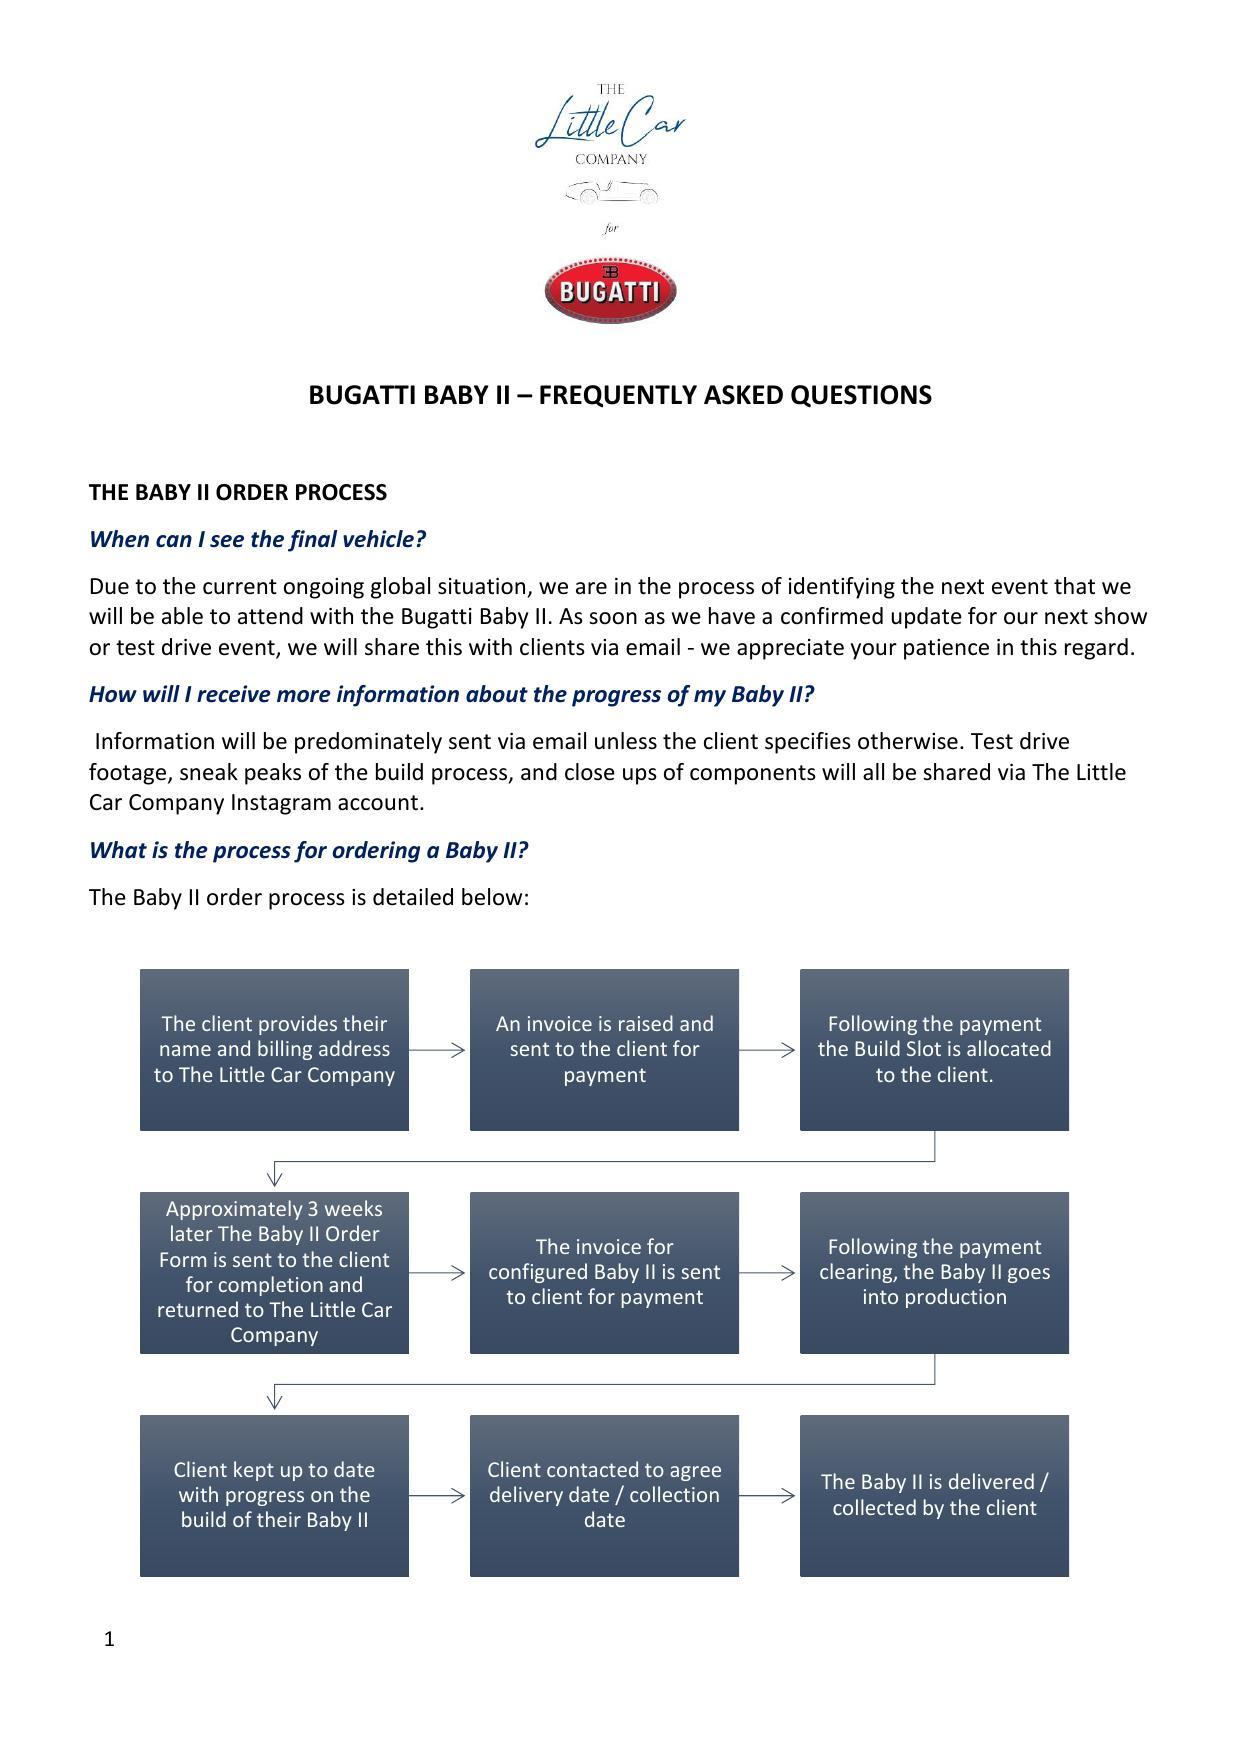 bugatti-baby-ii-frequently-asked-questions.pdf